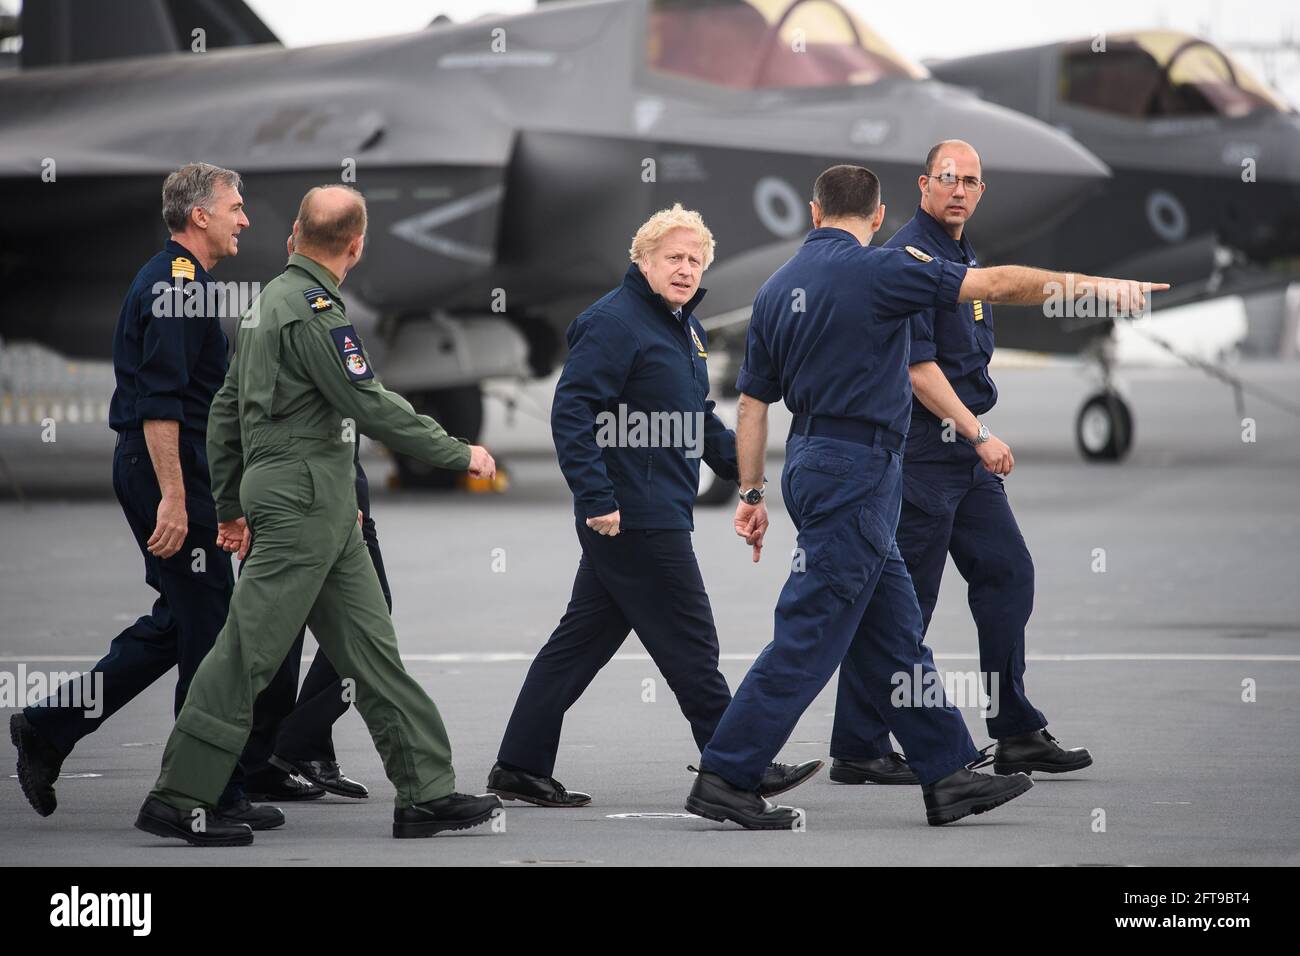 (Left to right) First Sea Lord Admiral Tony Radakin, Air Chief Marshal Sir Mike Wigston, Prime Minister Boris Johnson, Commodore Steve Moorhouse and Captain Angus Essenhigh face strong winds as they walk on the flight deck, during a visit aboard HMS Queen Elizabeth in Portsmouth ahead of its first operational deployment to the Far East. Picture date: Friday May 21, 2021. Stock Photo